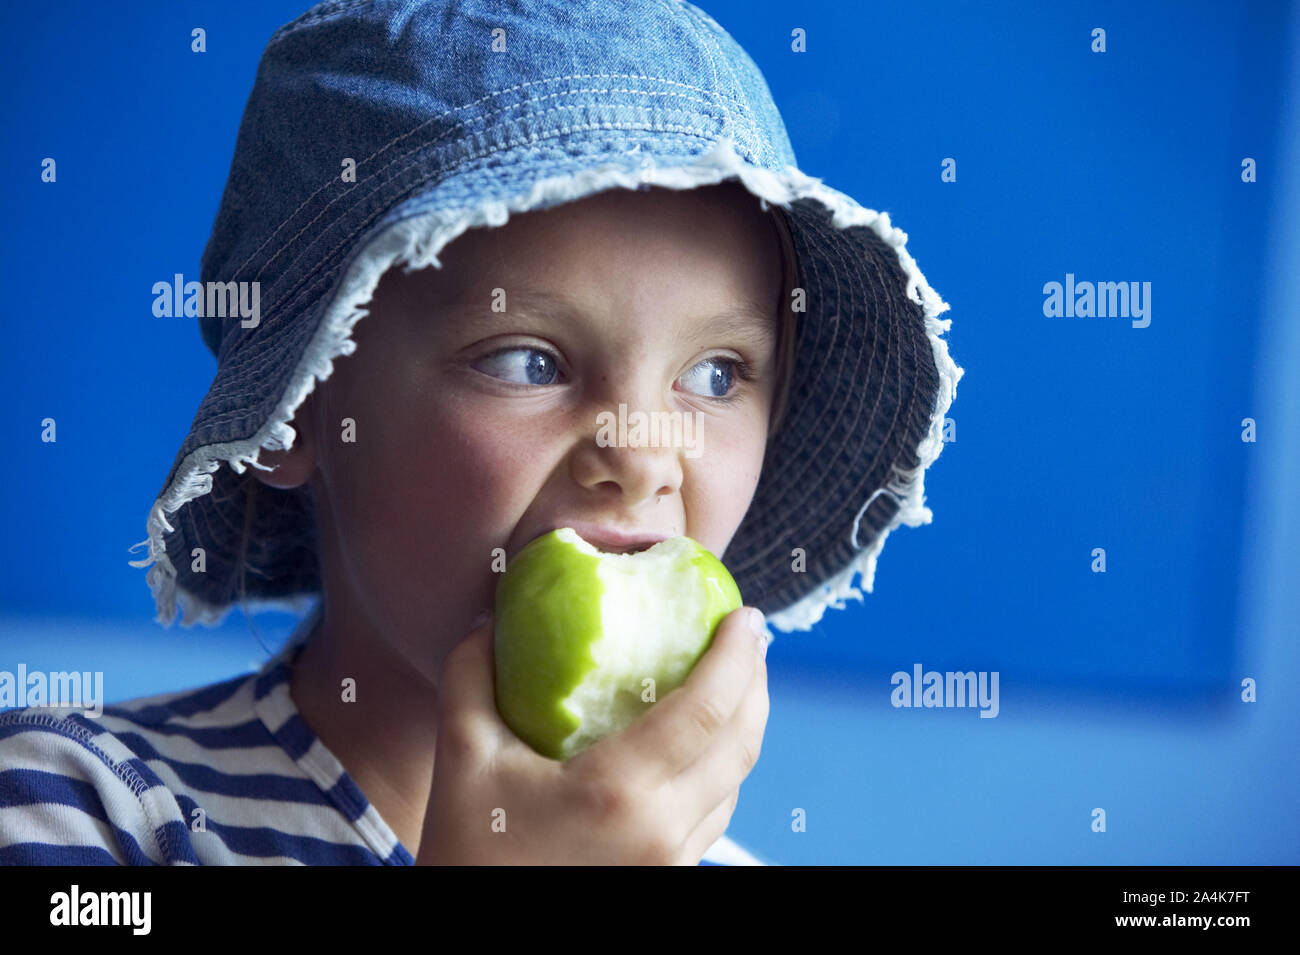 Girl eating an apple Banque D'Images